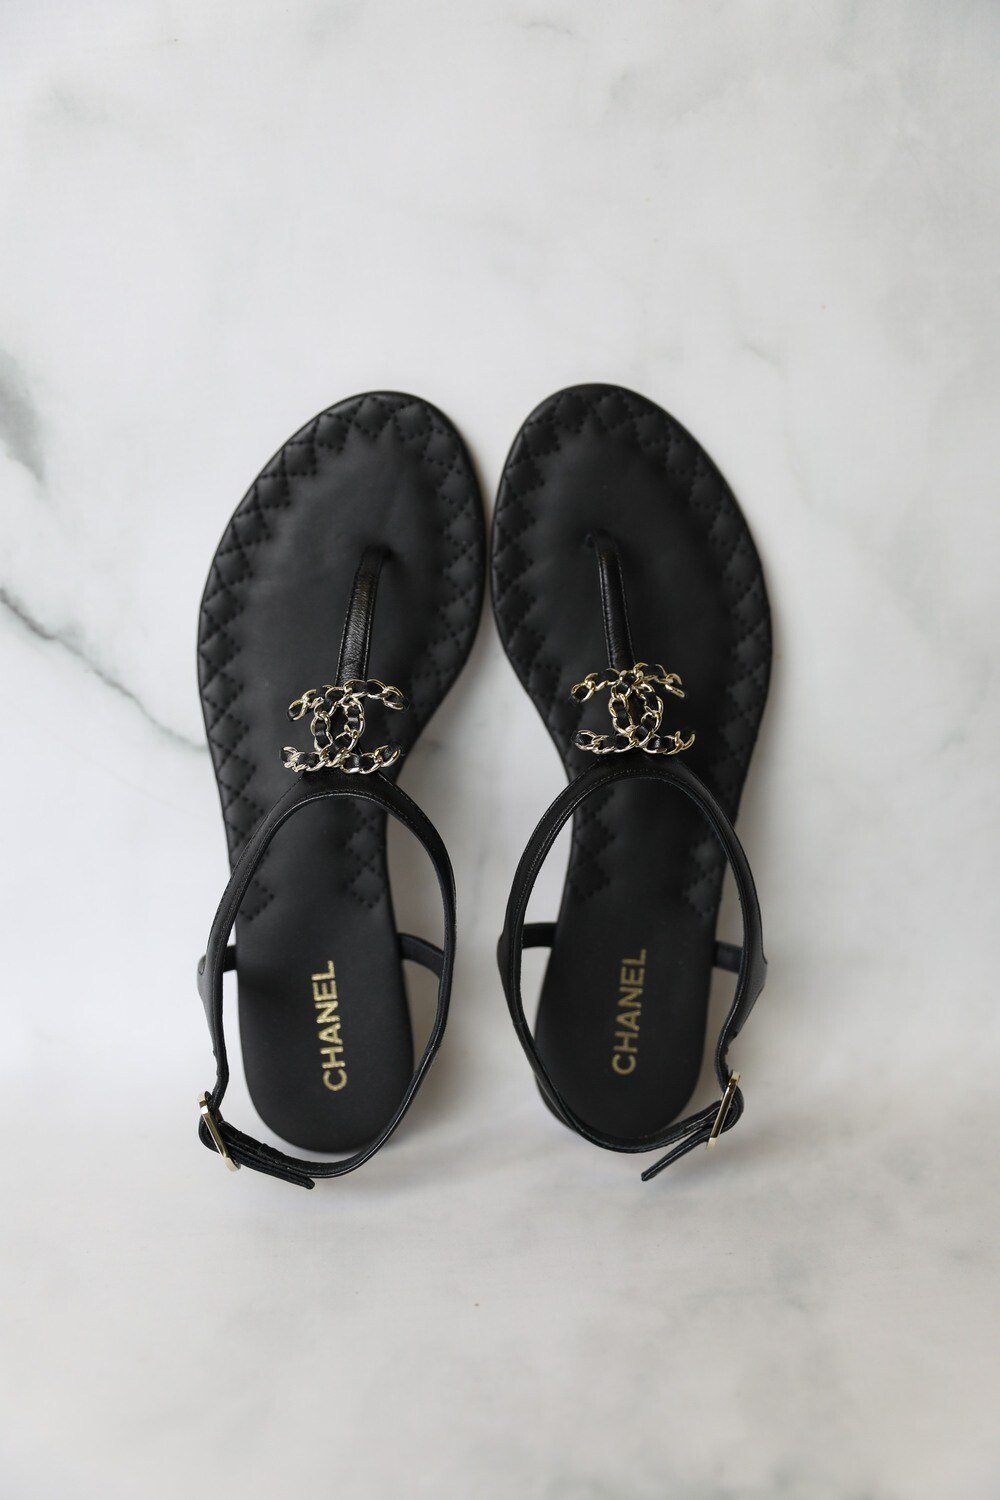 Chanel Thong Sandals, Black with Chain CC, Size 36, Preowned in Box WA001